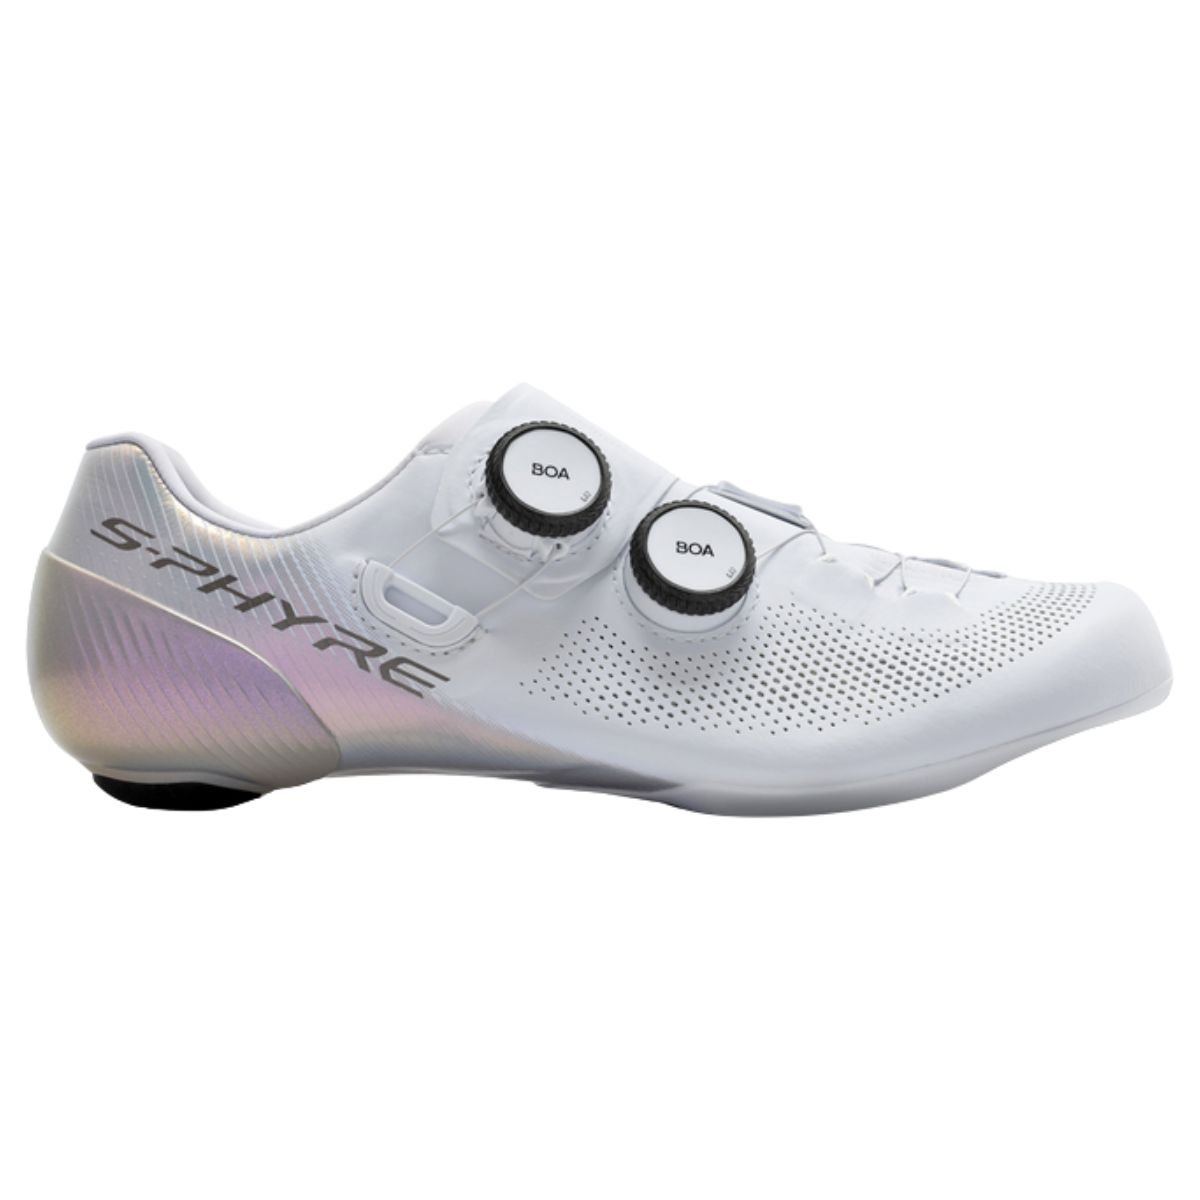 Chaussures Shimano Sphyre RC903 femme